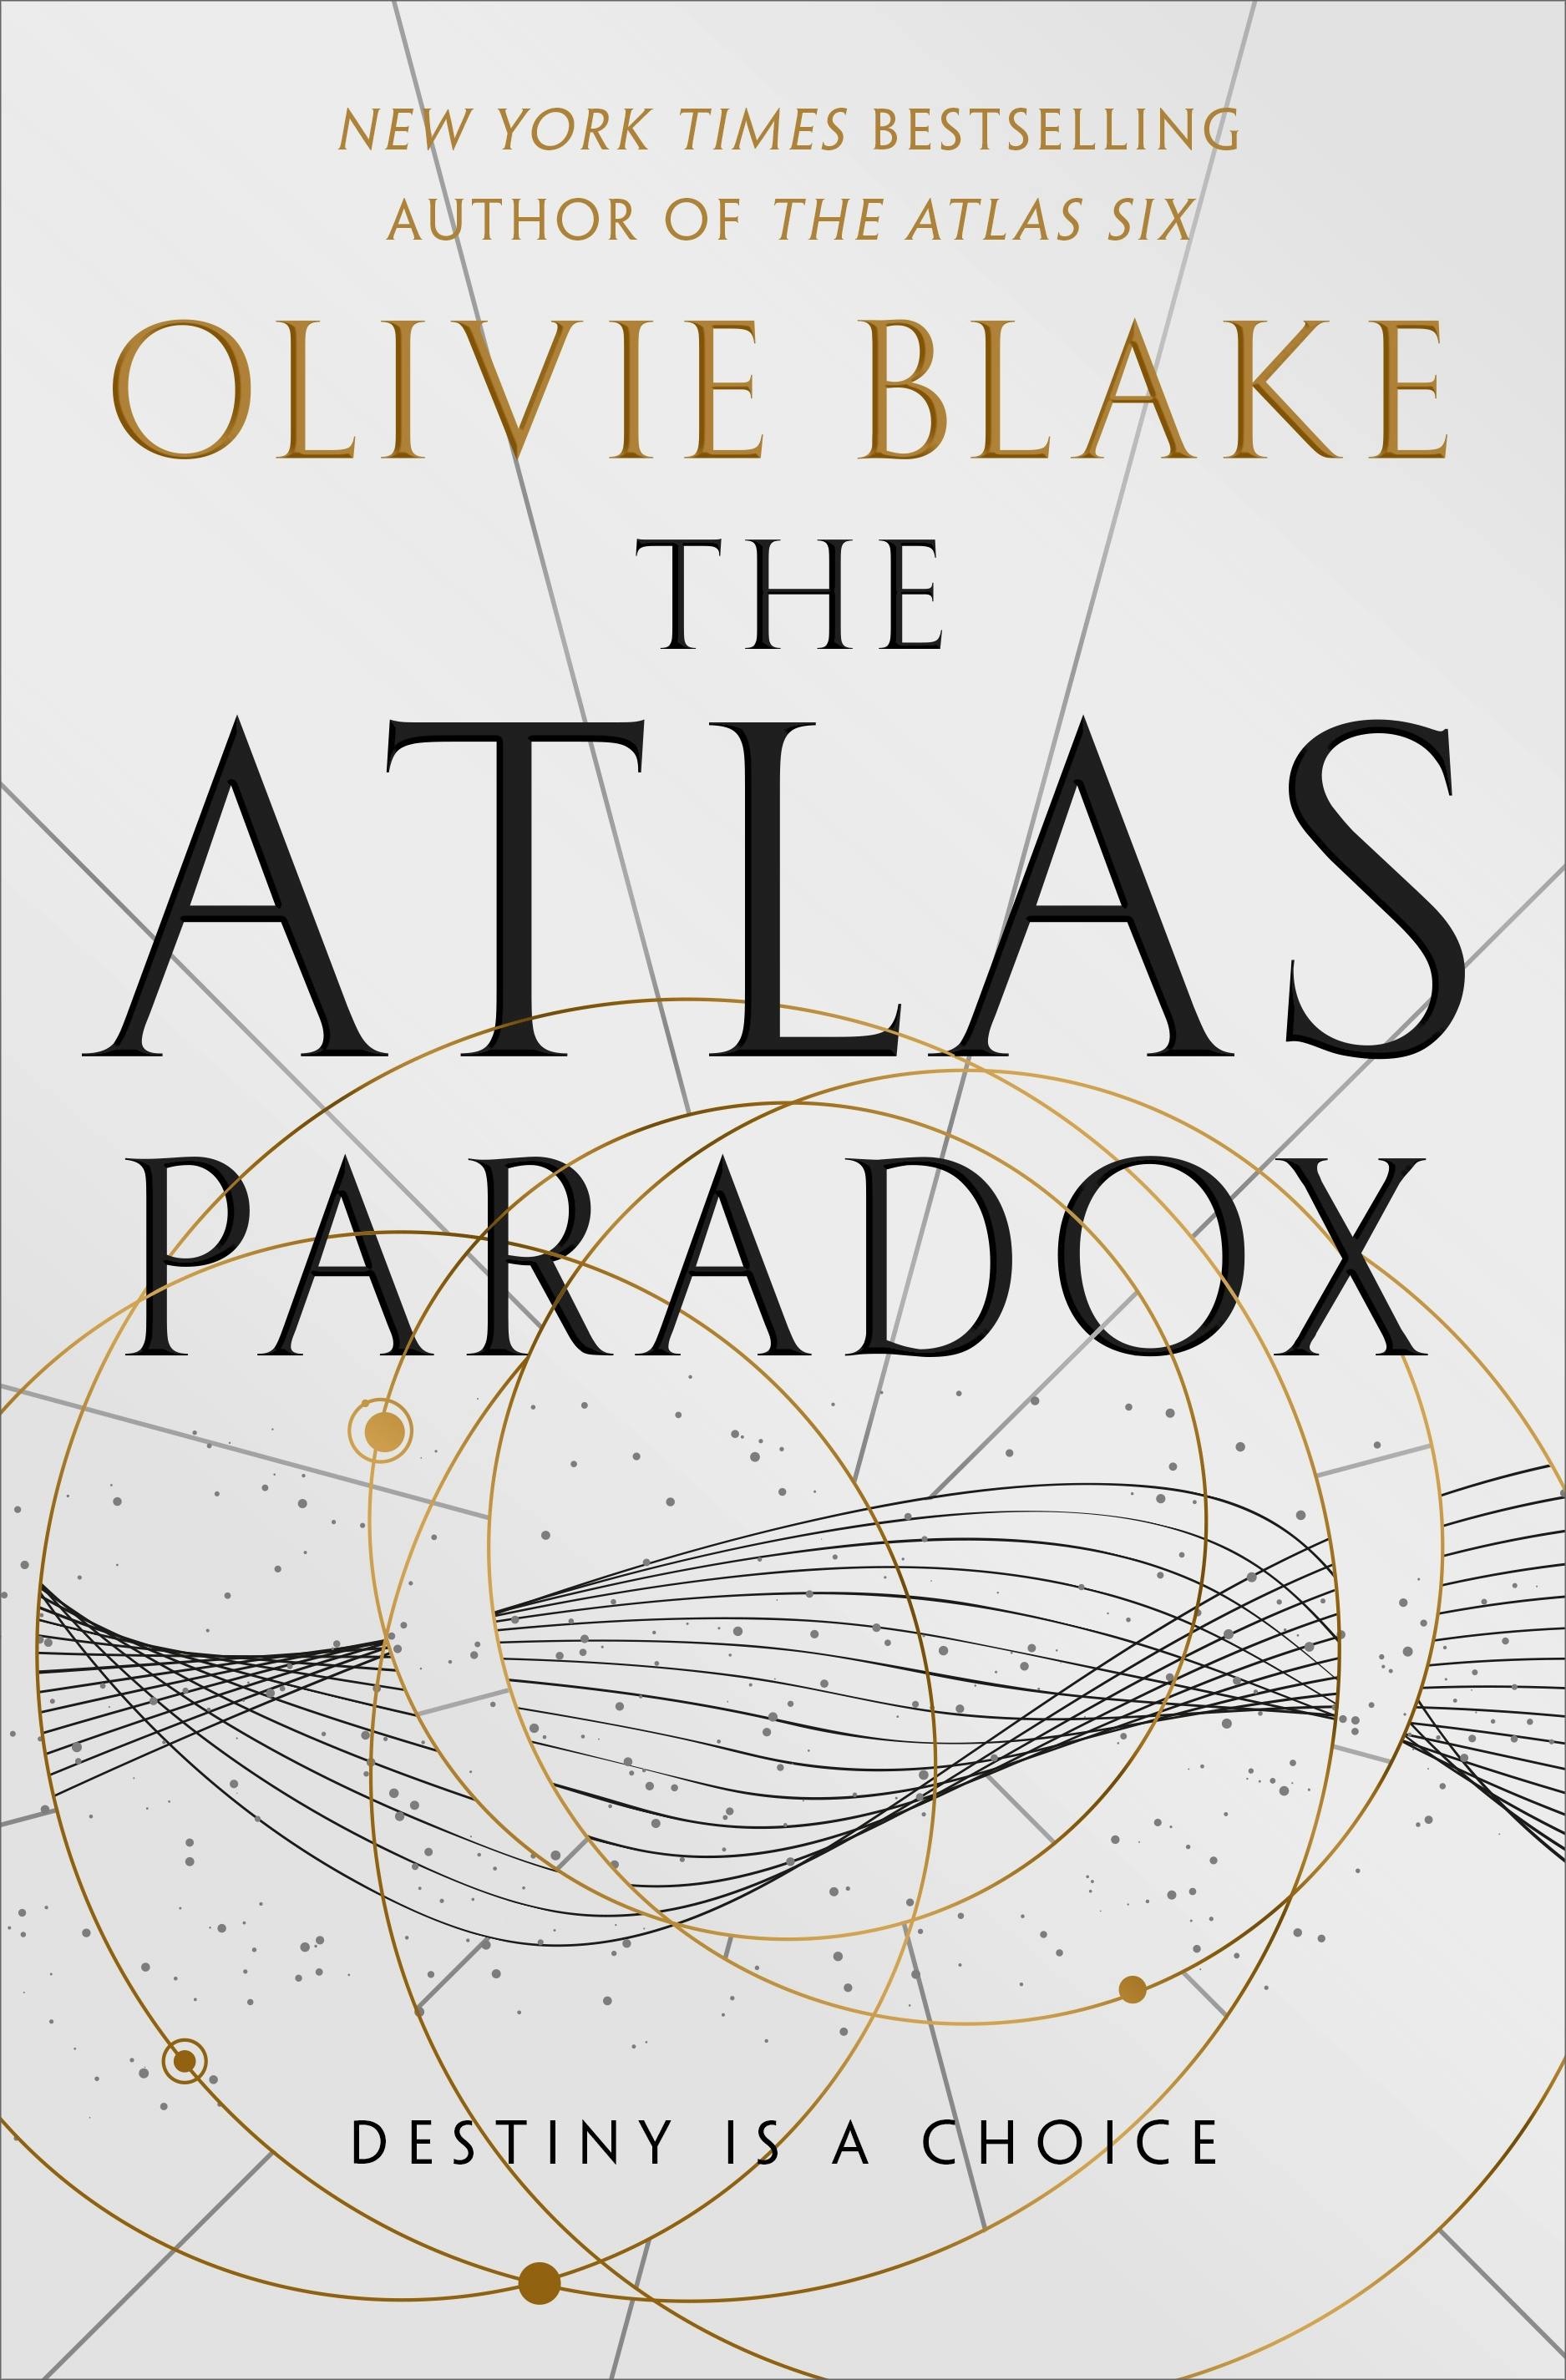 Cover for the book titled as: The Atlas Paradox